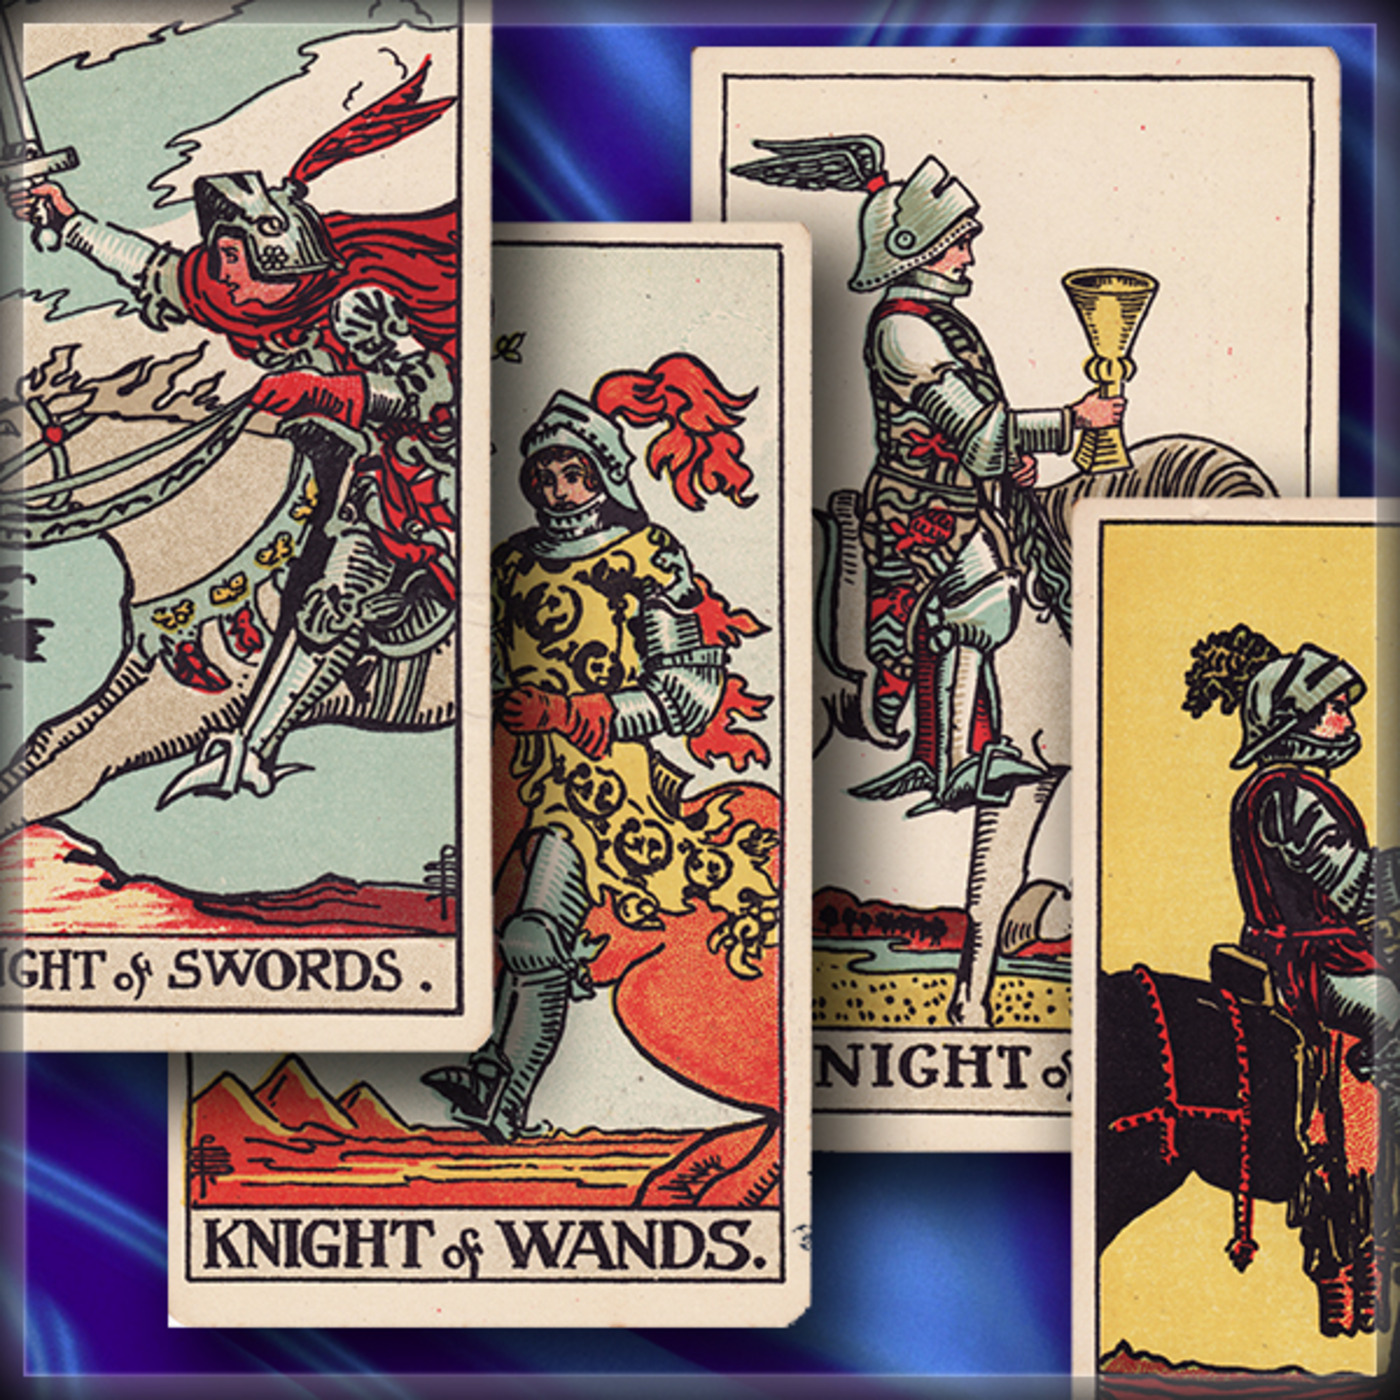 Double episode. Tarot court cards series: Knights